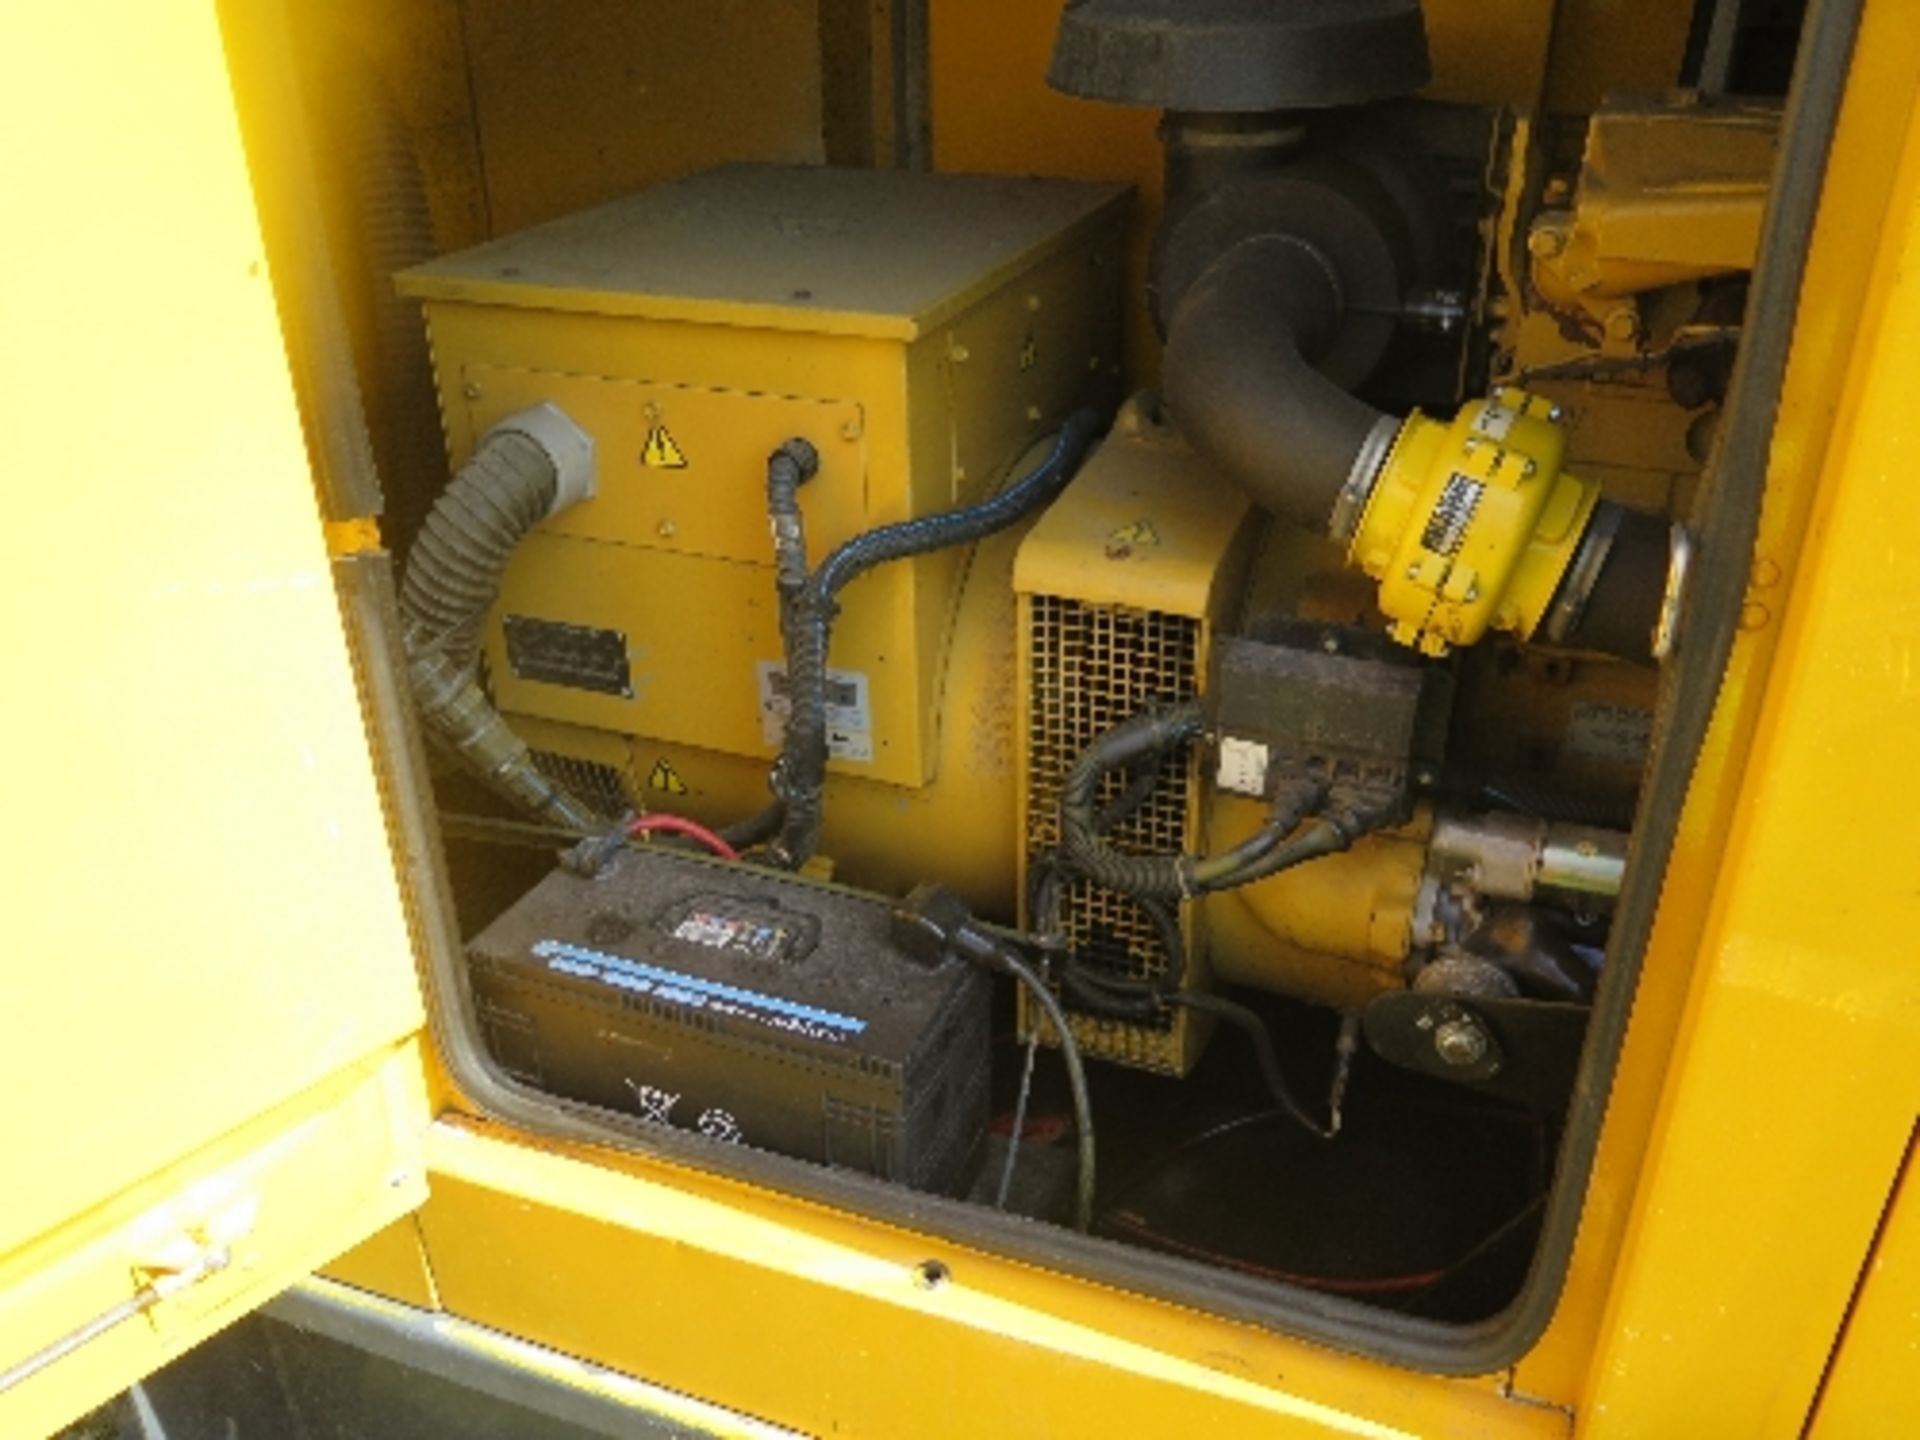 Caterpillar XQE100 generator 16850 hrs 138842
PERKINS POWER - RUNS AND MAKES POWER
ALL LOTS are - Image 5 of 6